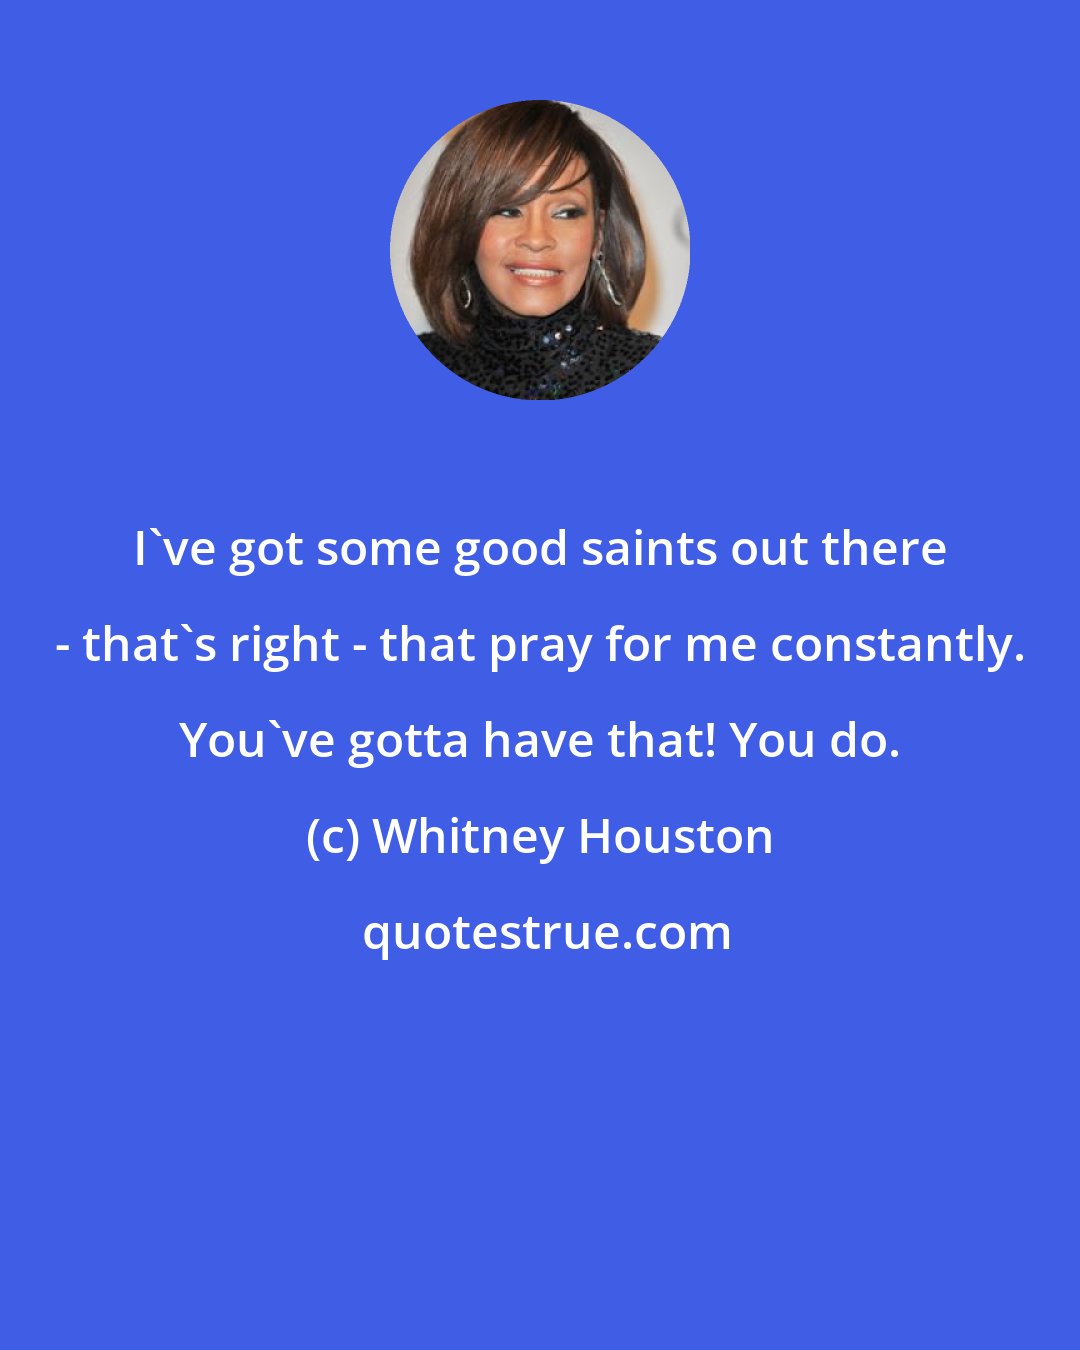 Whitney Houston: I've got some good saints out there - that's right - that pray for me constantly. You've gotta have that! You do.